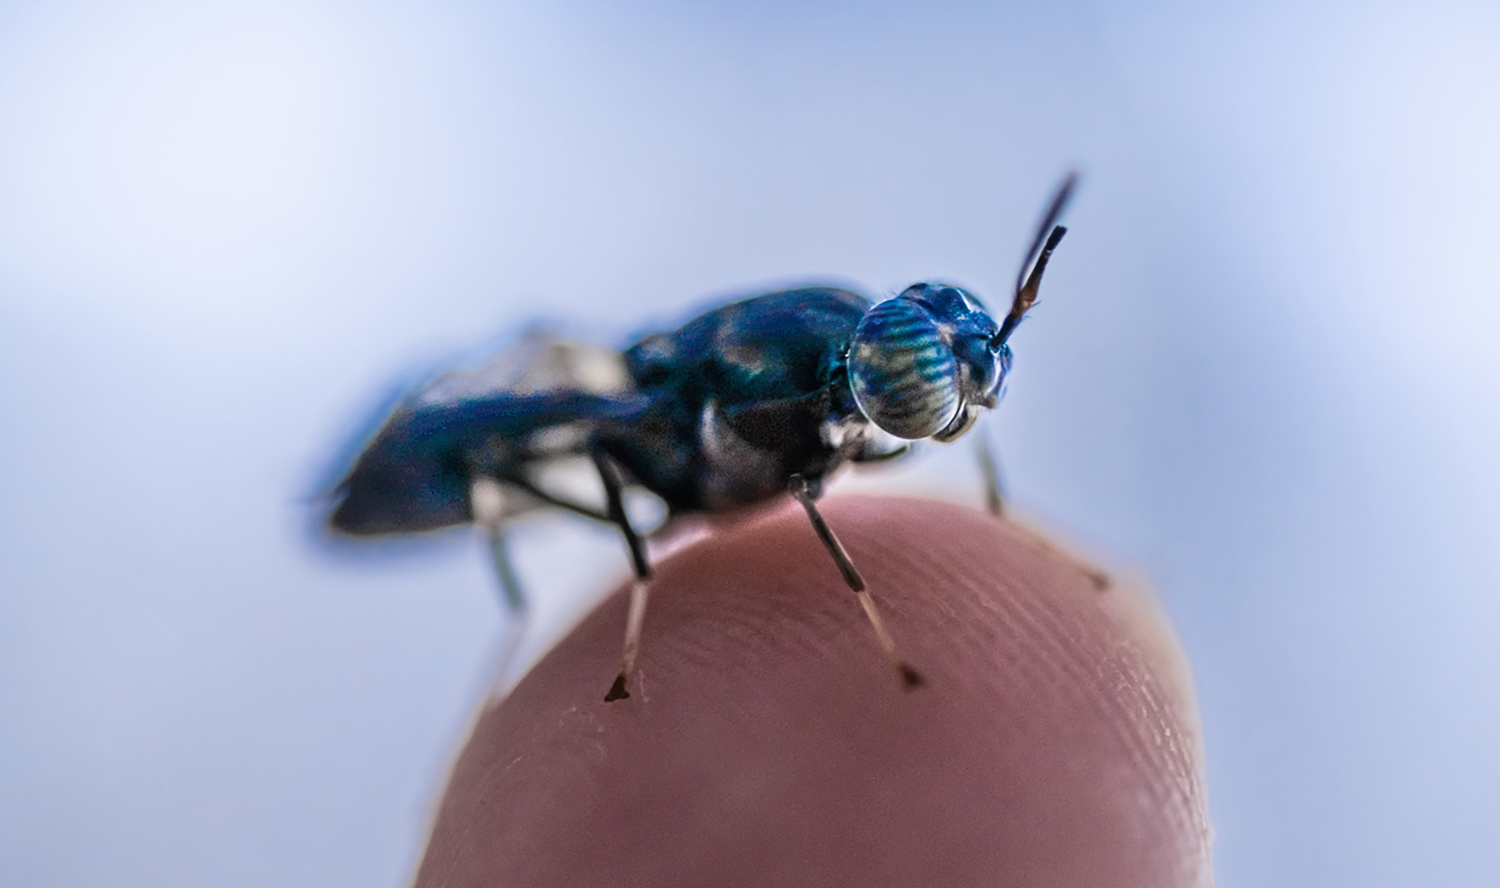 A black soldier fly sits on a fingertip.